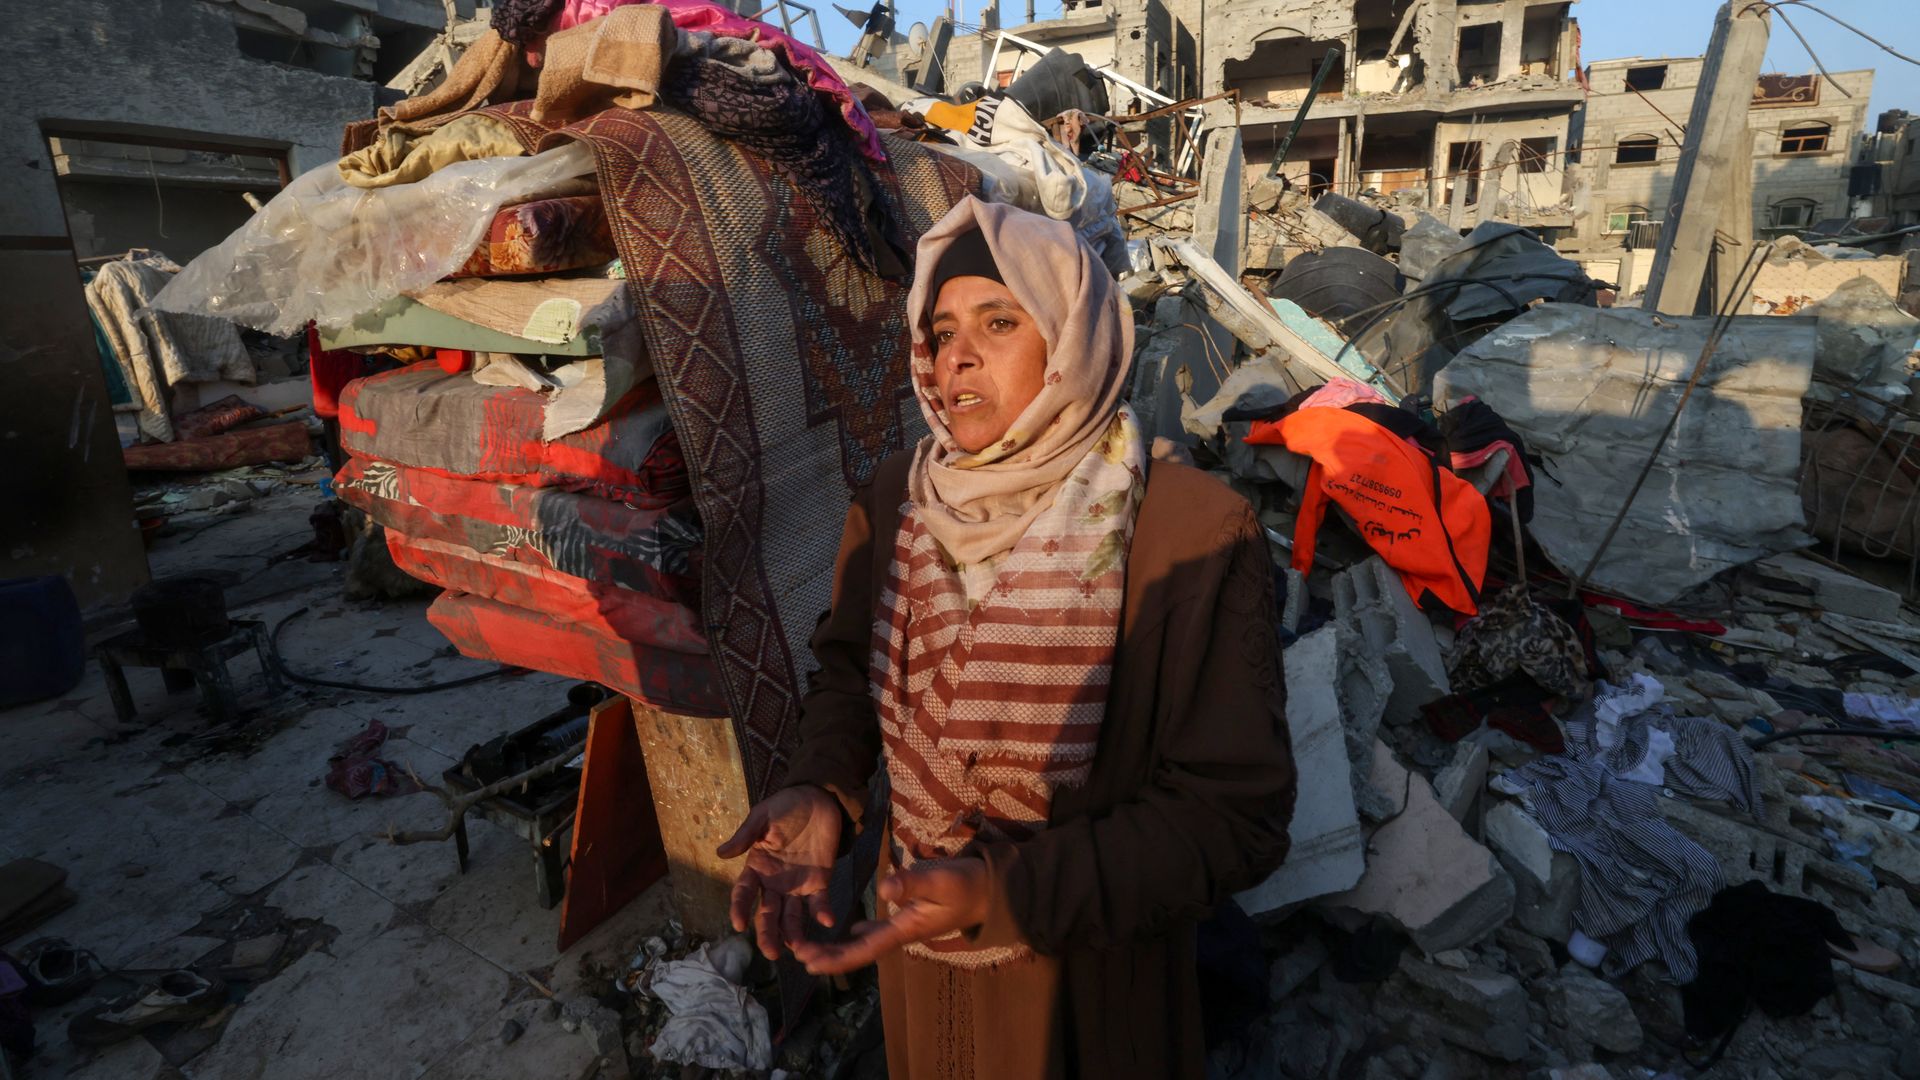  A woman reacts standing in front of a house destroyed in Israeli bombardment in Rafah refugee camp on Jan. 1. Photo: AFP via Getty Images